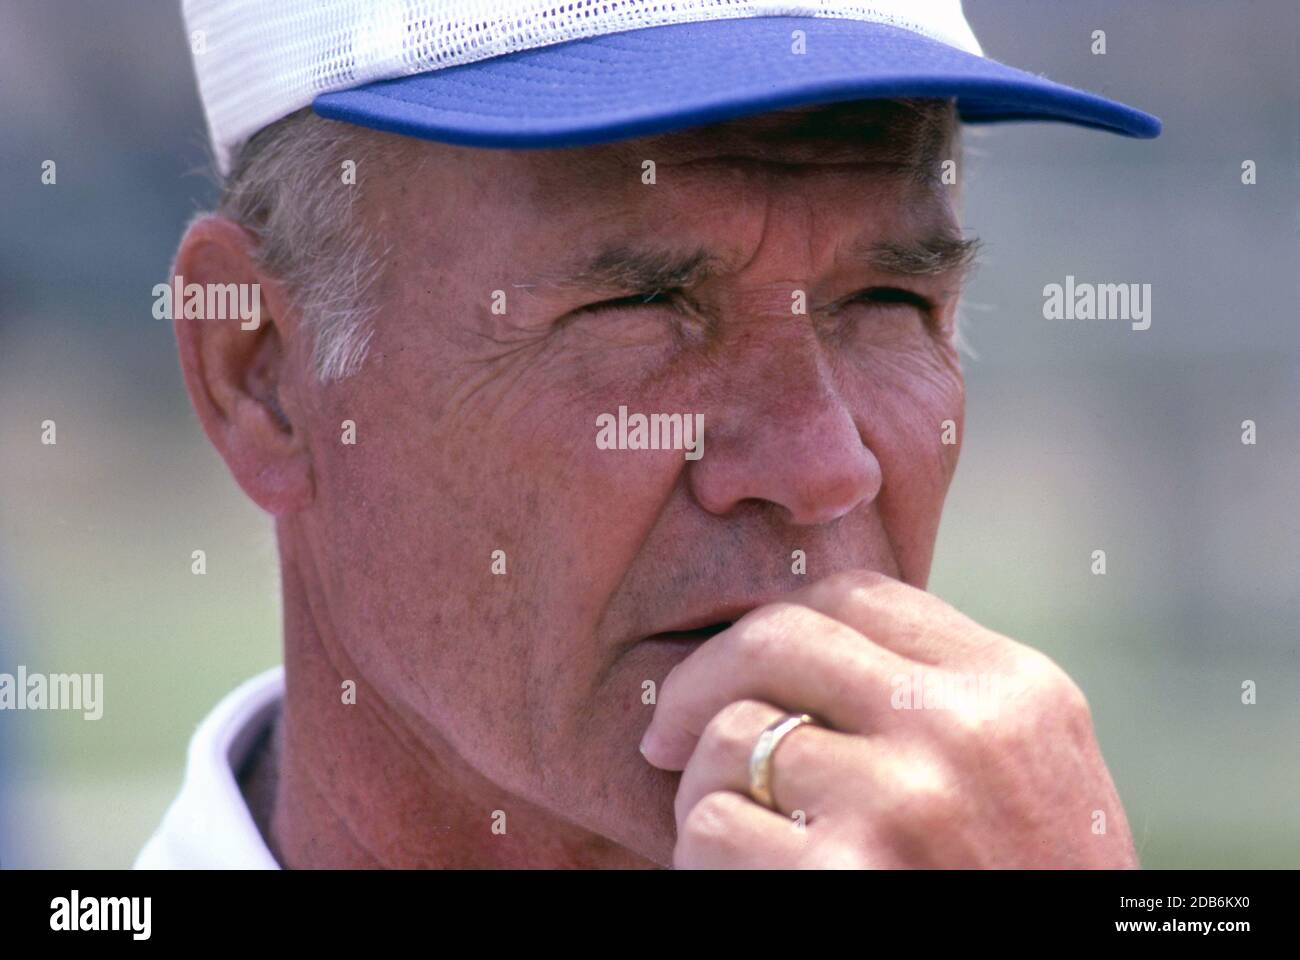 Tom Landry was the coach of the Dallas Cowboys NFL football team from 1960 to 1988. Stock Photo